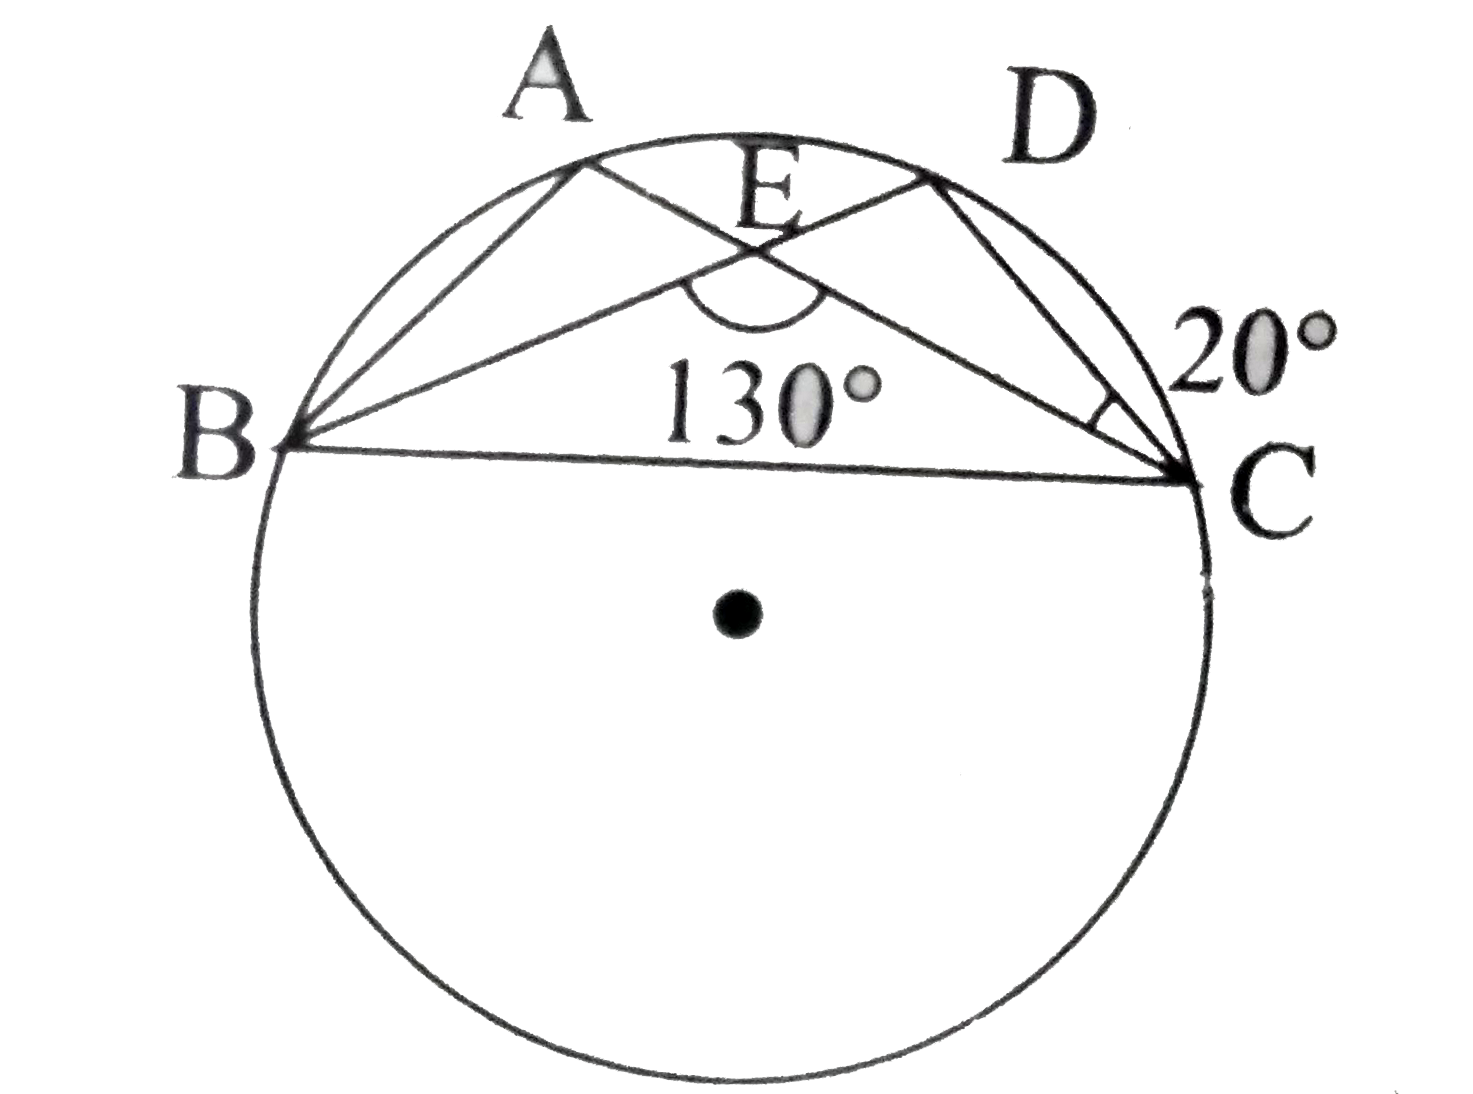 In the given figure A,B,C and D are four points on a circle, AC and BD intersect at a point E such that angleBEC=130^(@) and angleECD=20^(@). Find angleBAC.